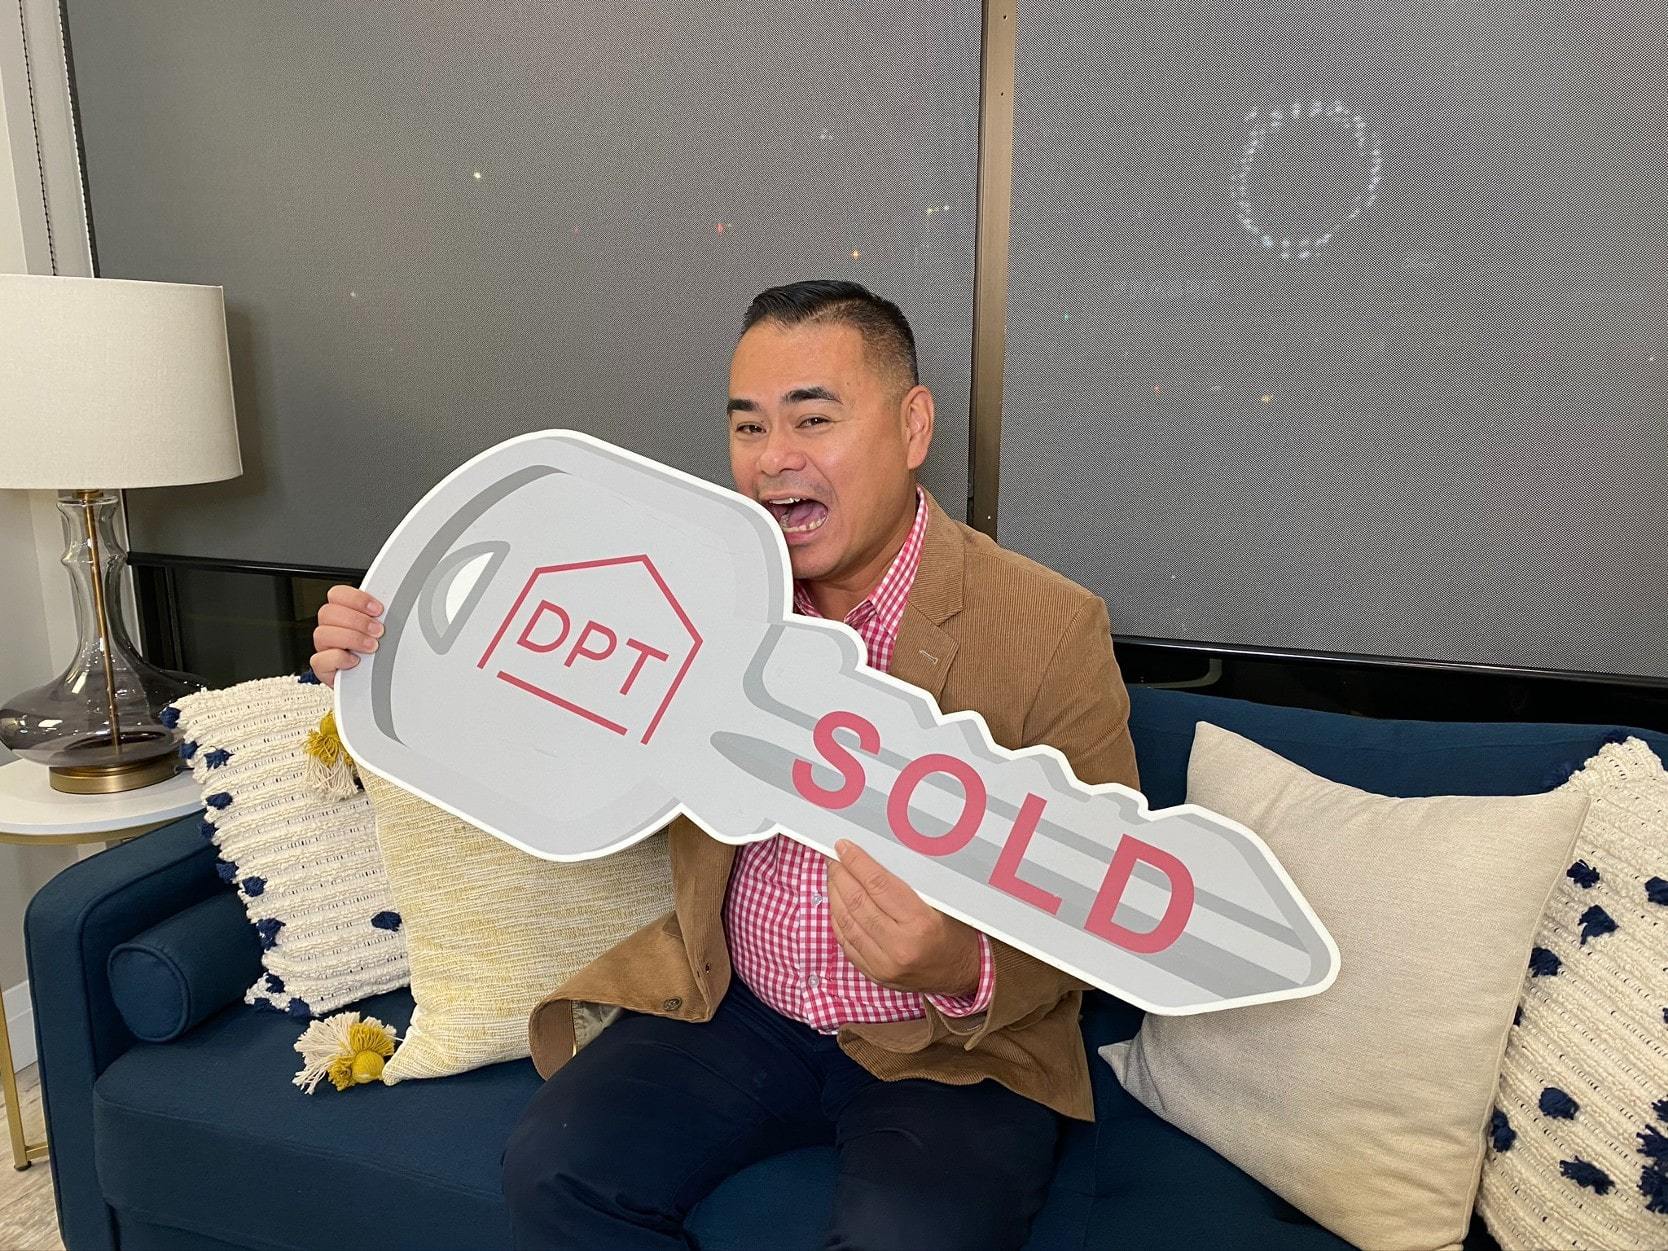 Glenn Kho realtor with a sold sign for a home for sale